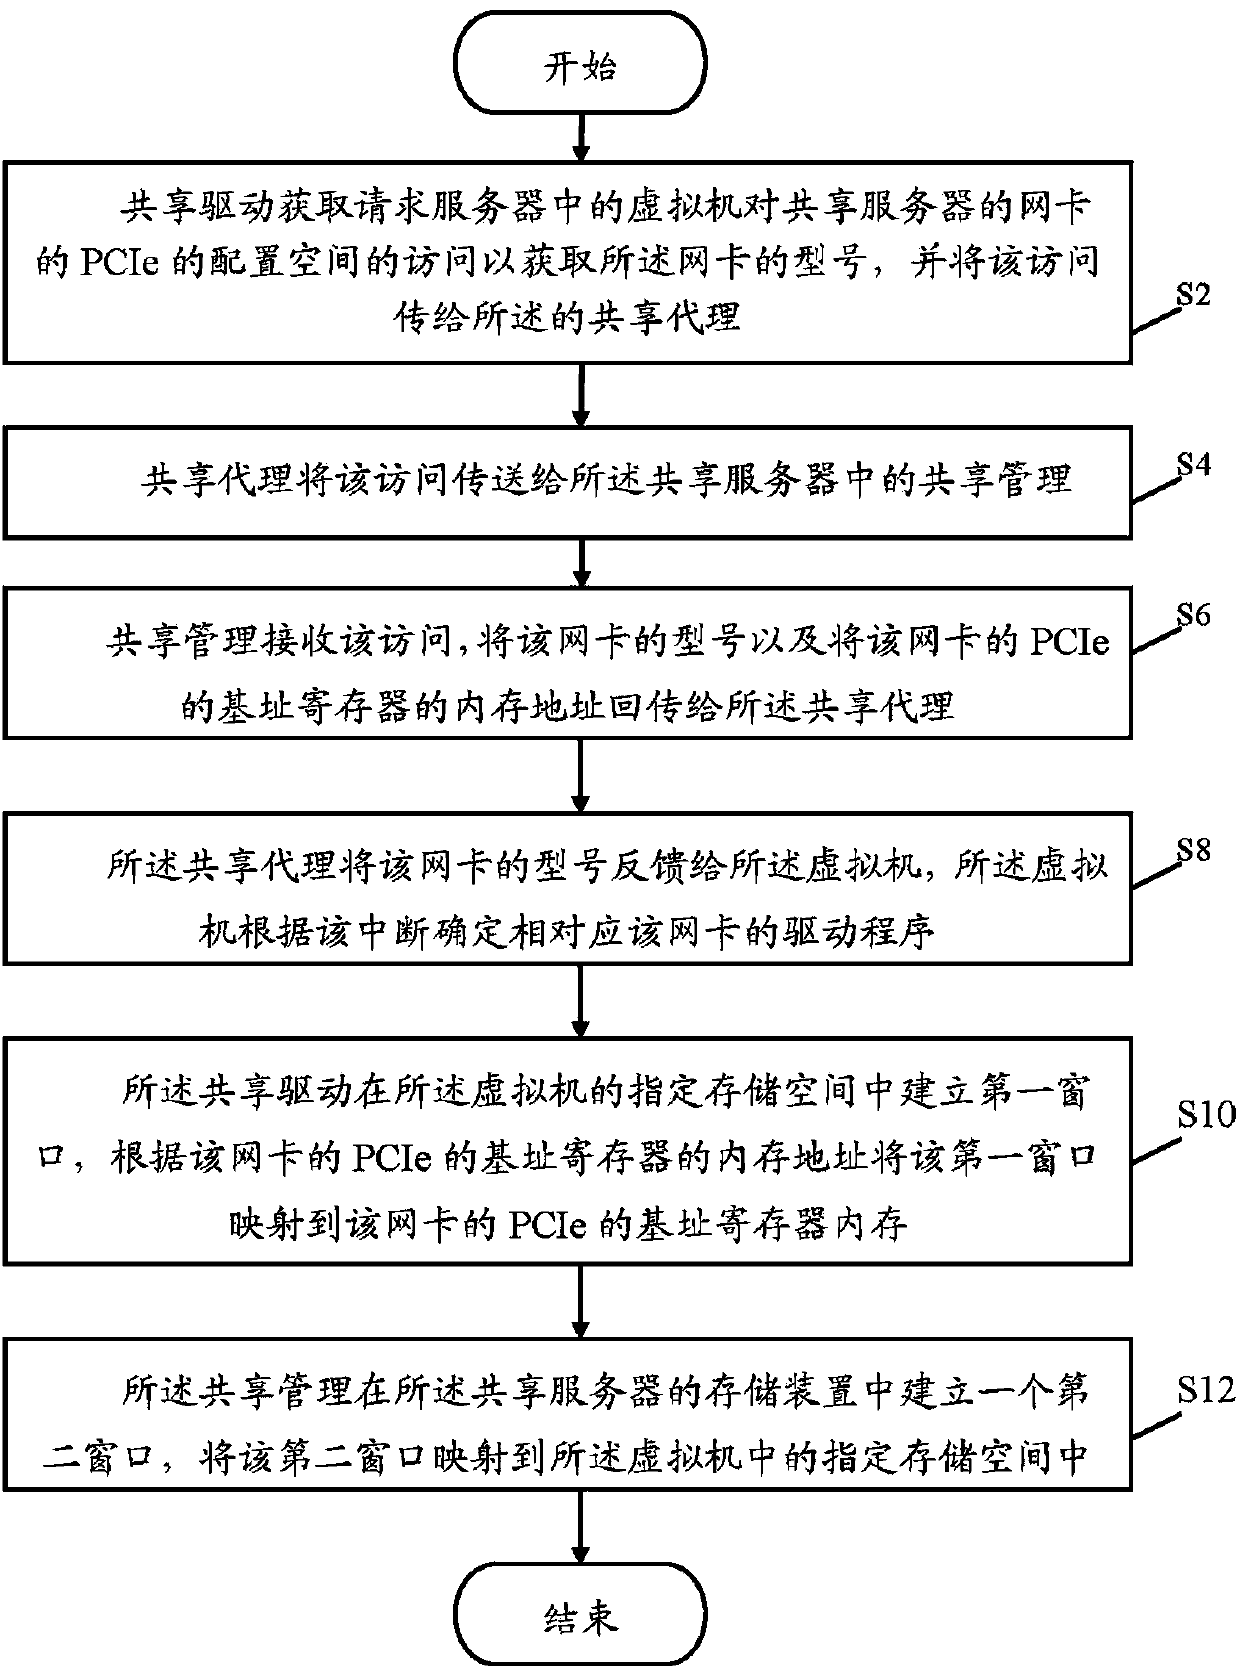 Device sharing system with PCIe interface and device sharing method with PCIe interface